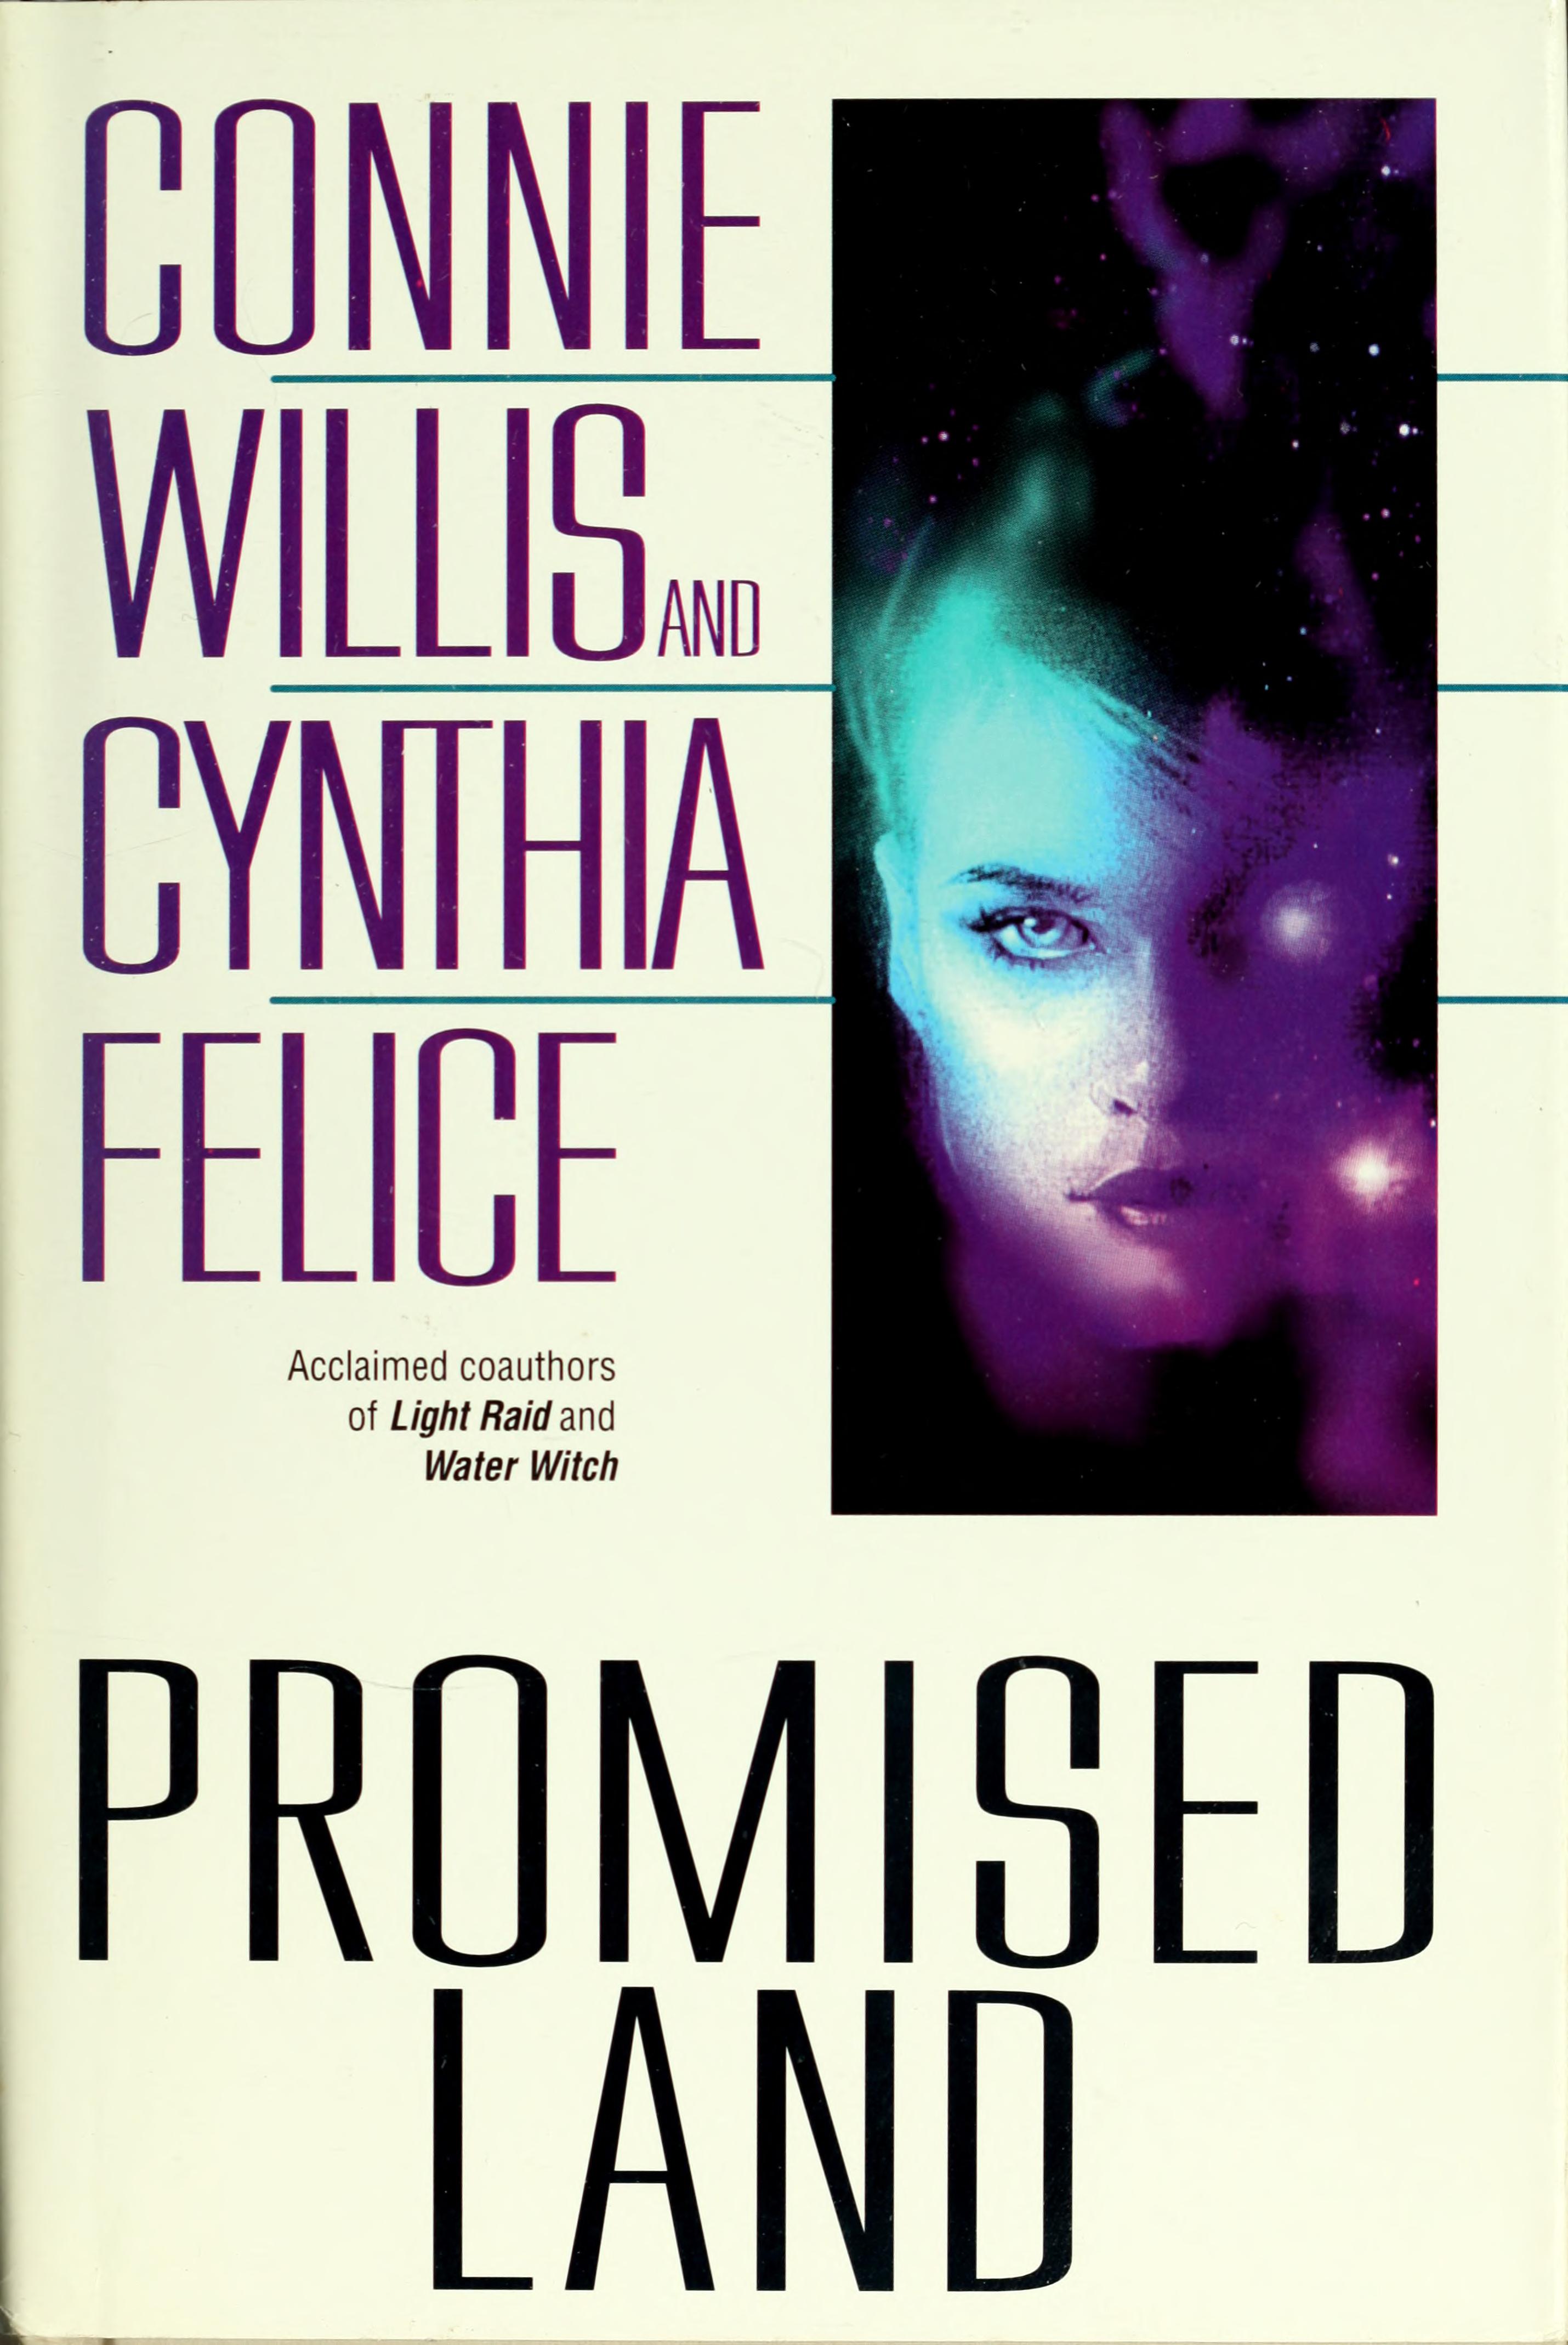 Connie Willis, Cynthia Felice: Promised Land (Paperback, 1997, Ace)